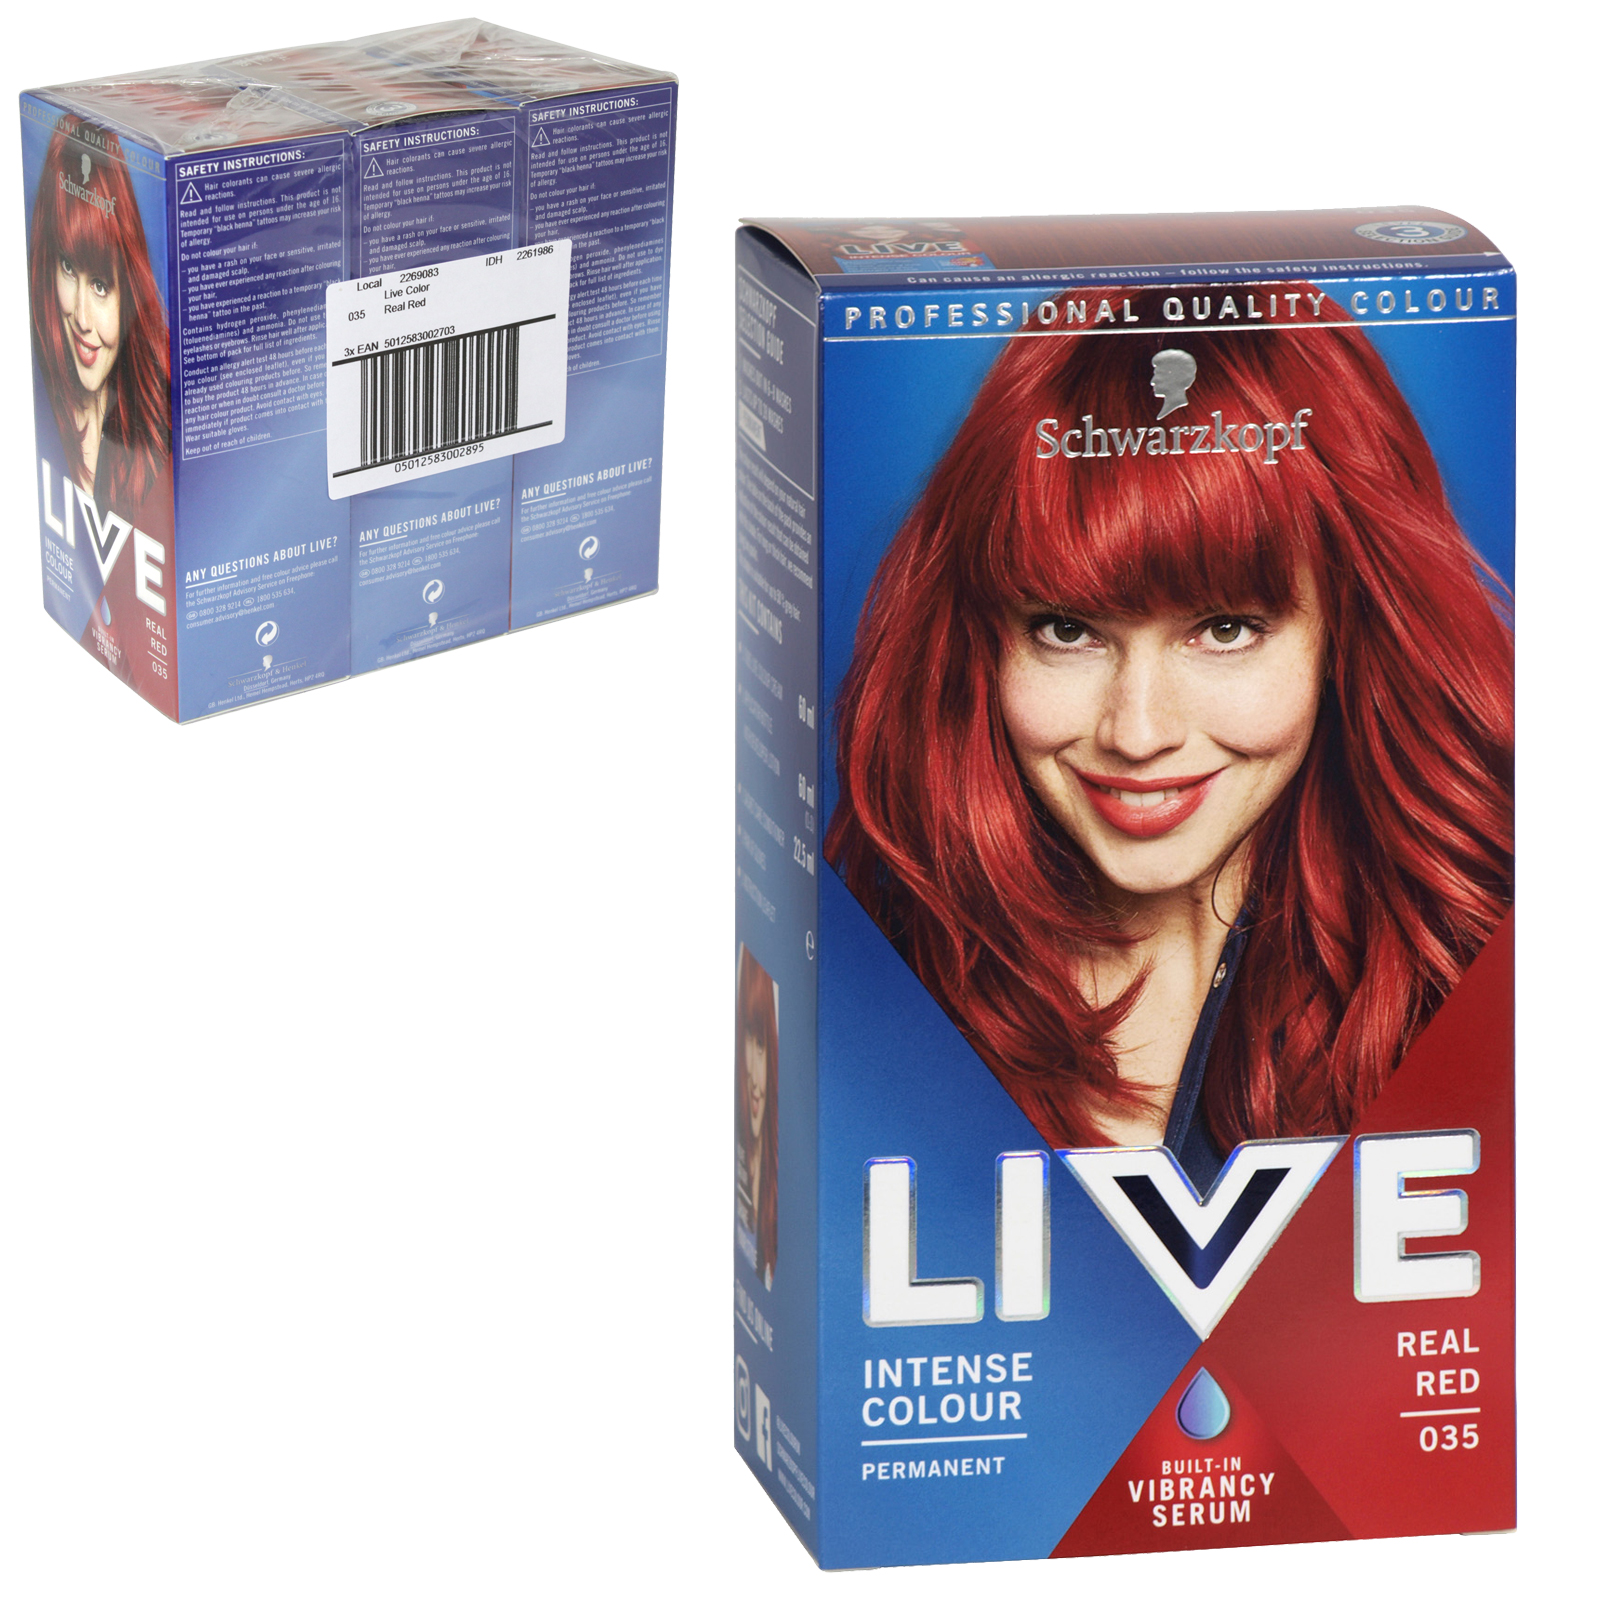 Schwarzkopf Live Real Red 035 Permanent Hair Dye - Concord Cash and Carry